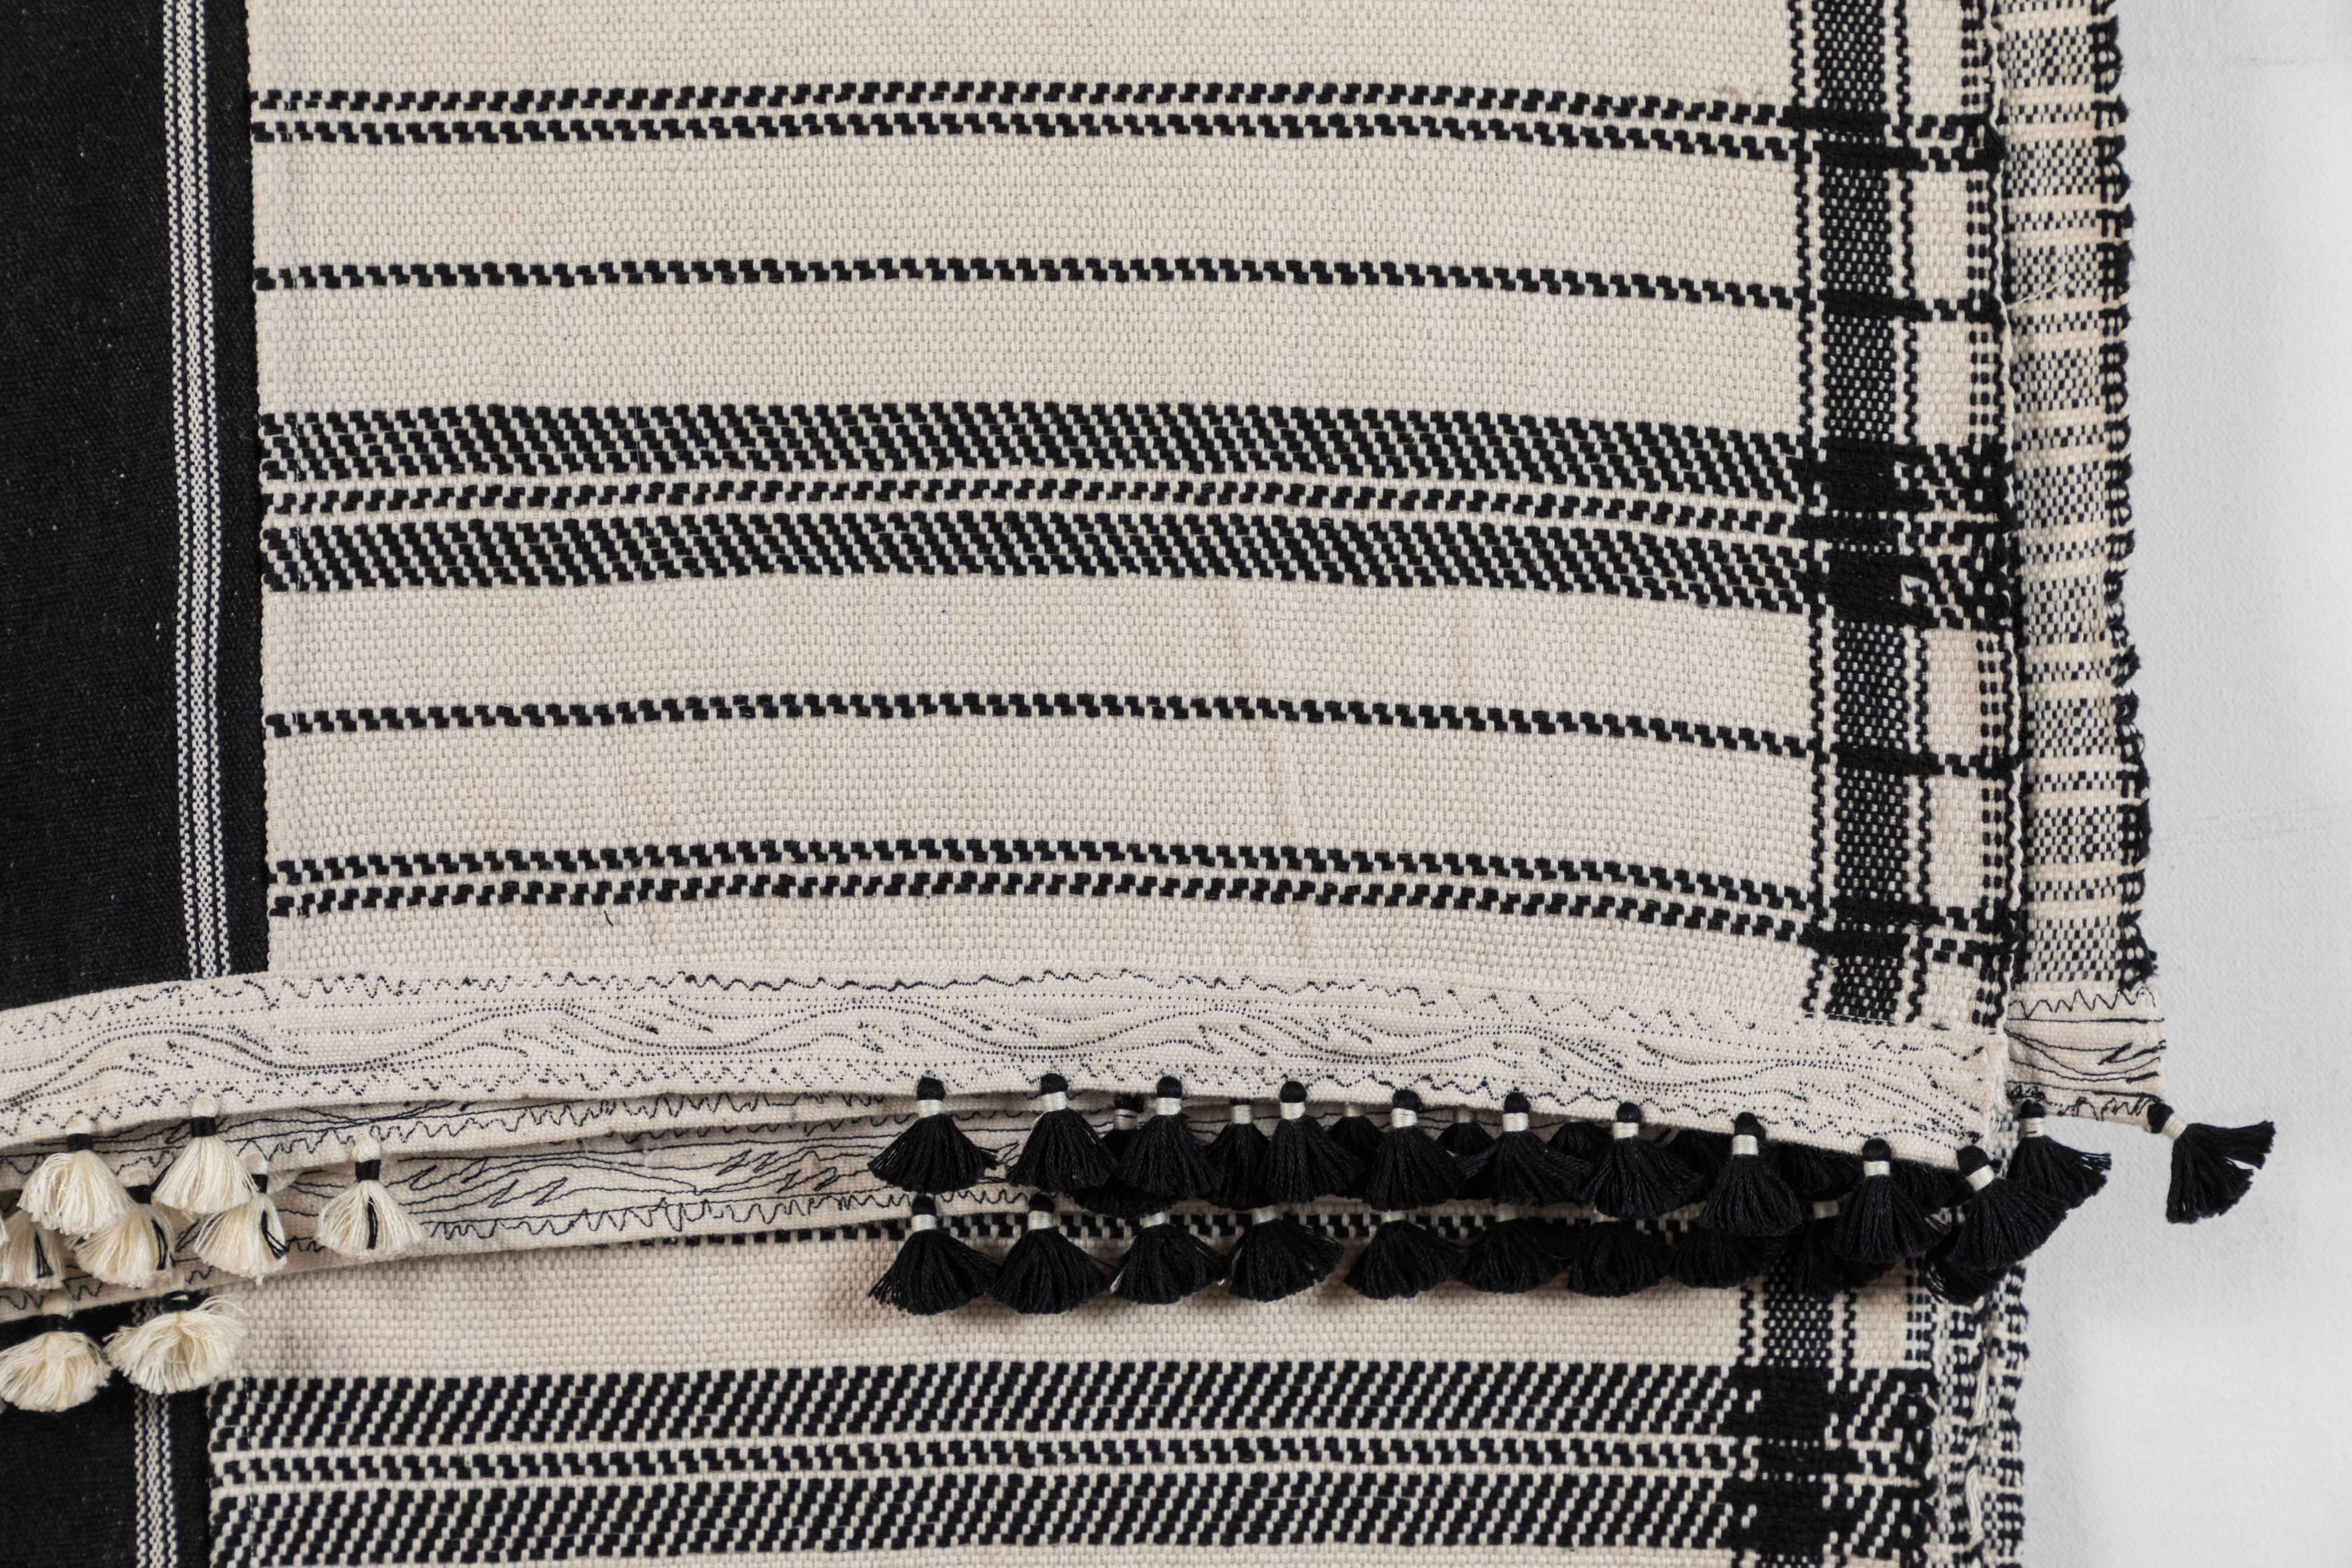 Kala naturally dyed organic cotton from Gujarat, India. Hand loomed using traditional Indian textile techniques to produce supplementary weft woven designs. This black and white bedcover/throw has added hand-knotted tassels.     